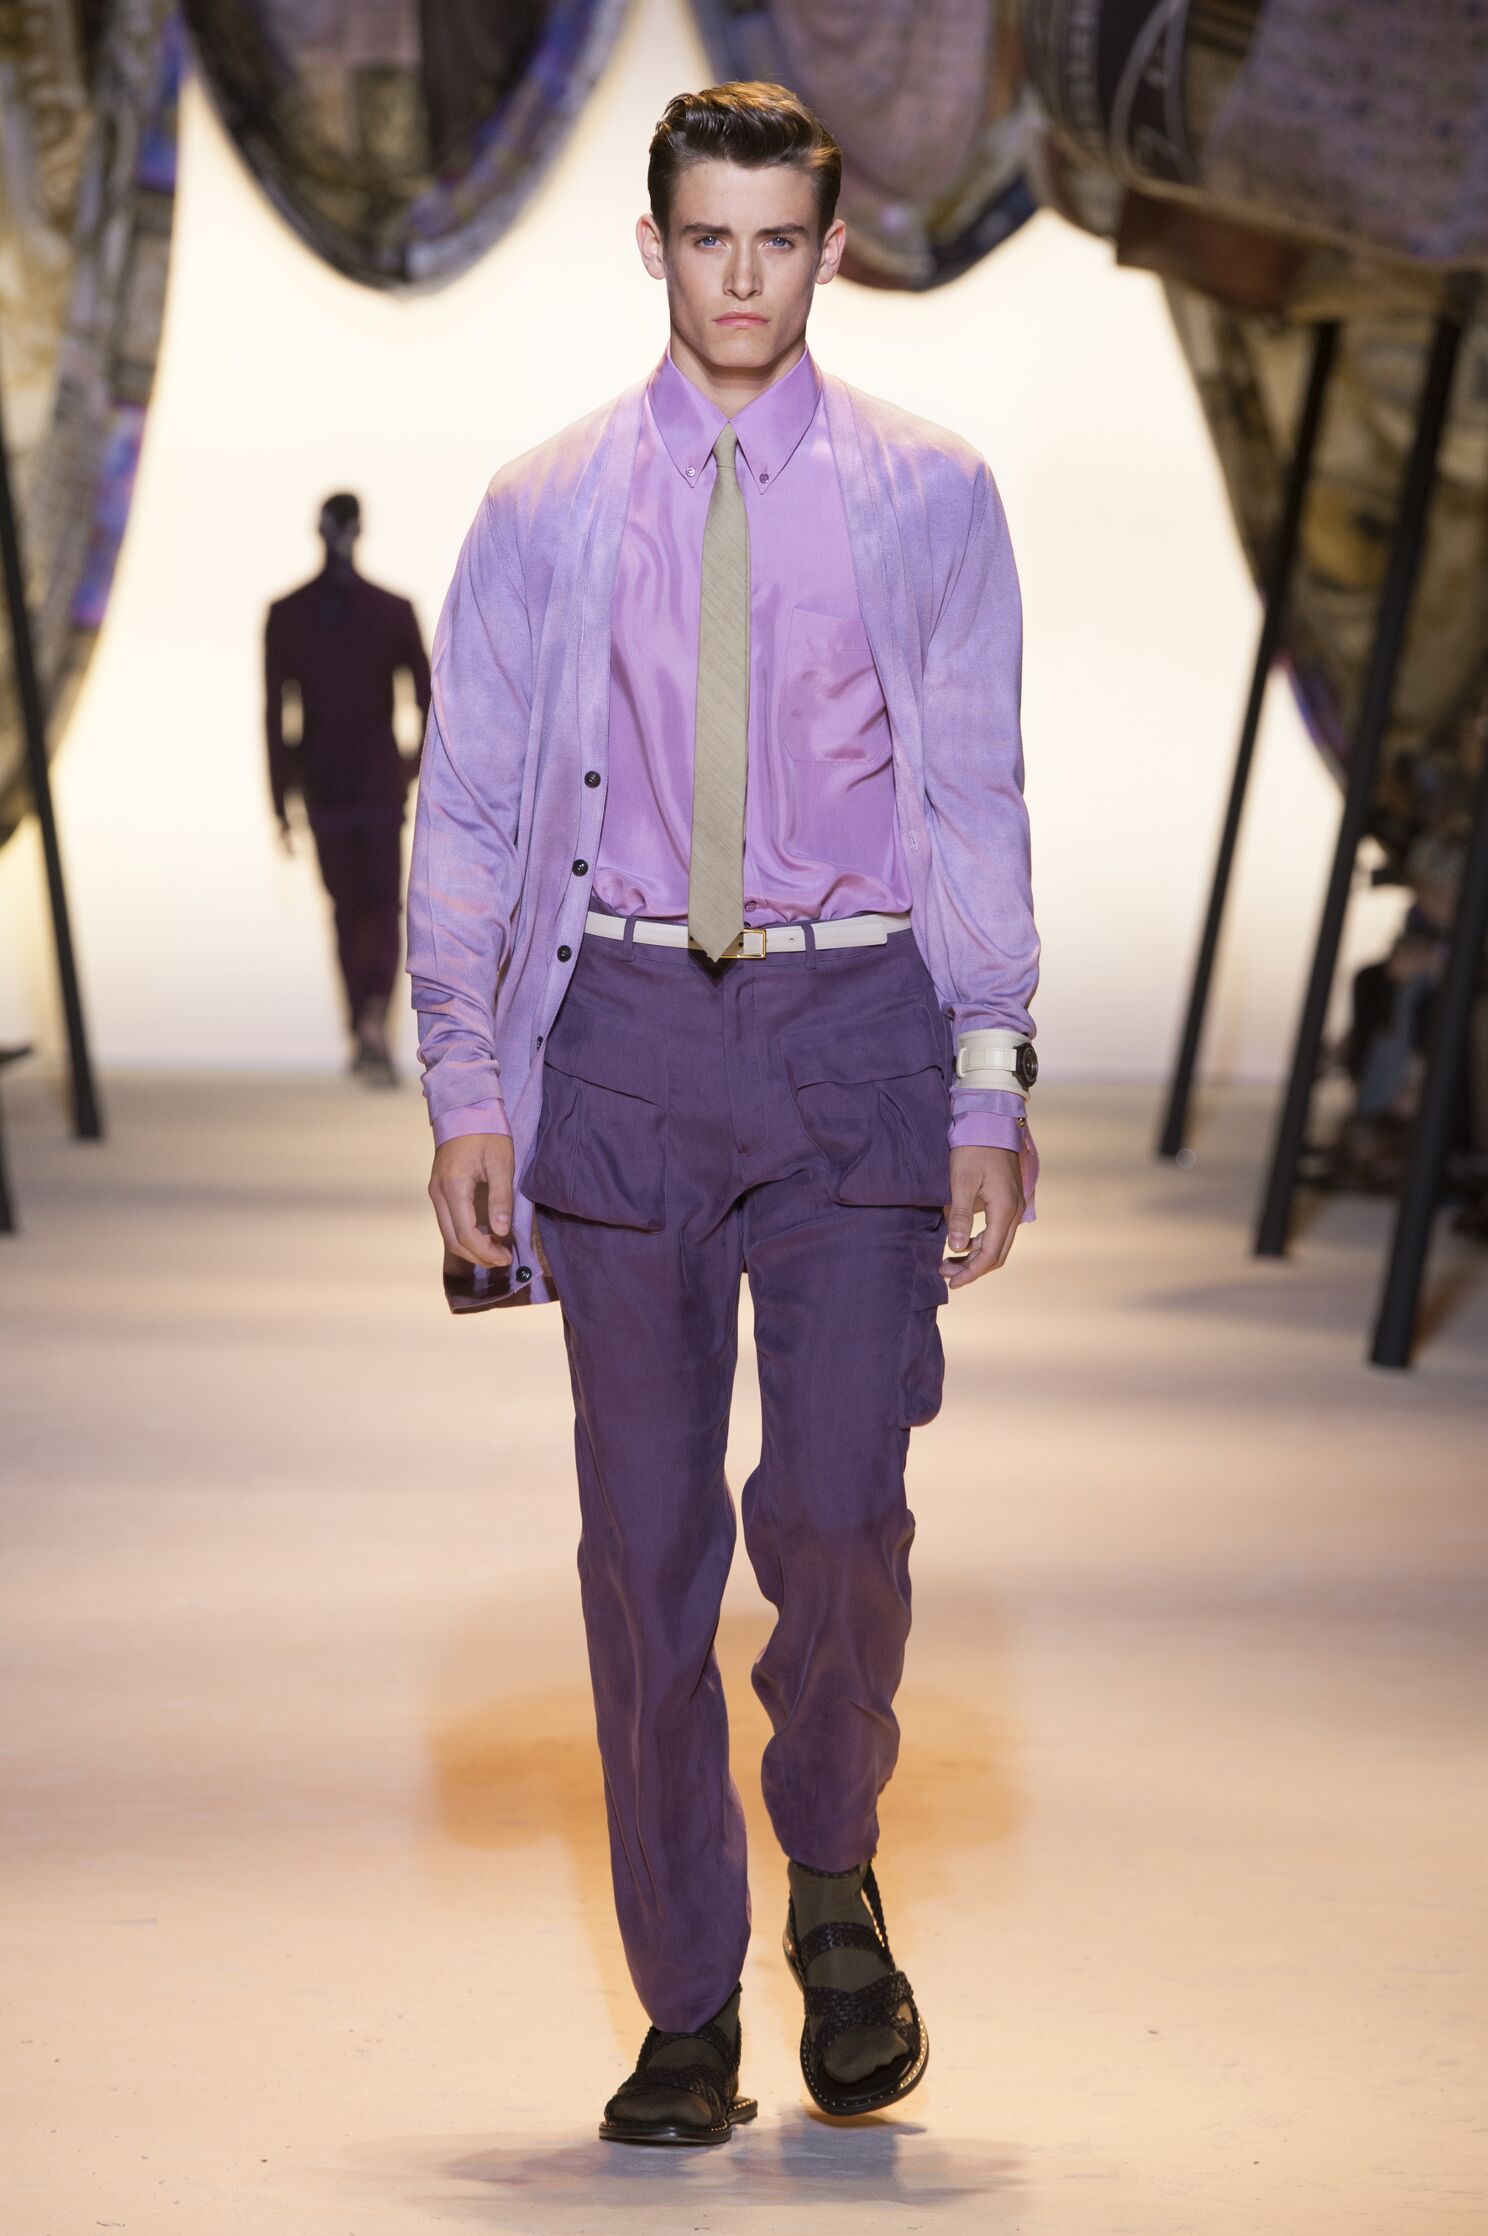 VERSACE SPRING SUMMER 2016 MEN'S COLLECTION | The Skinny Beep